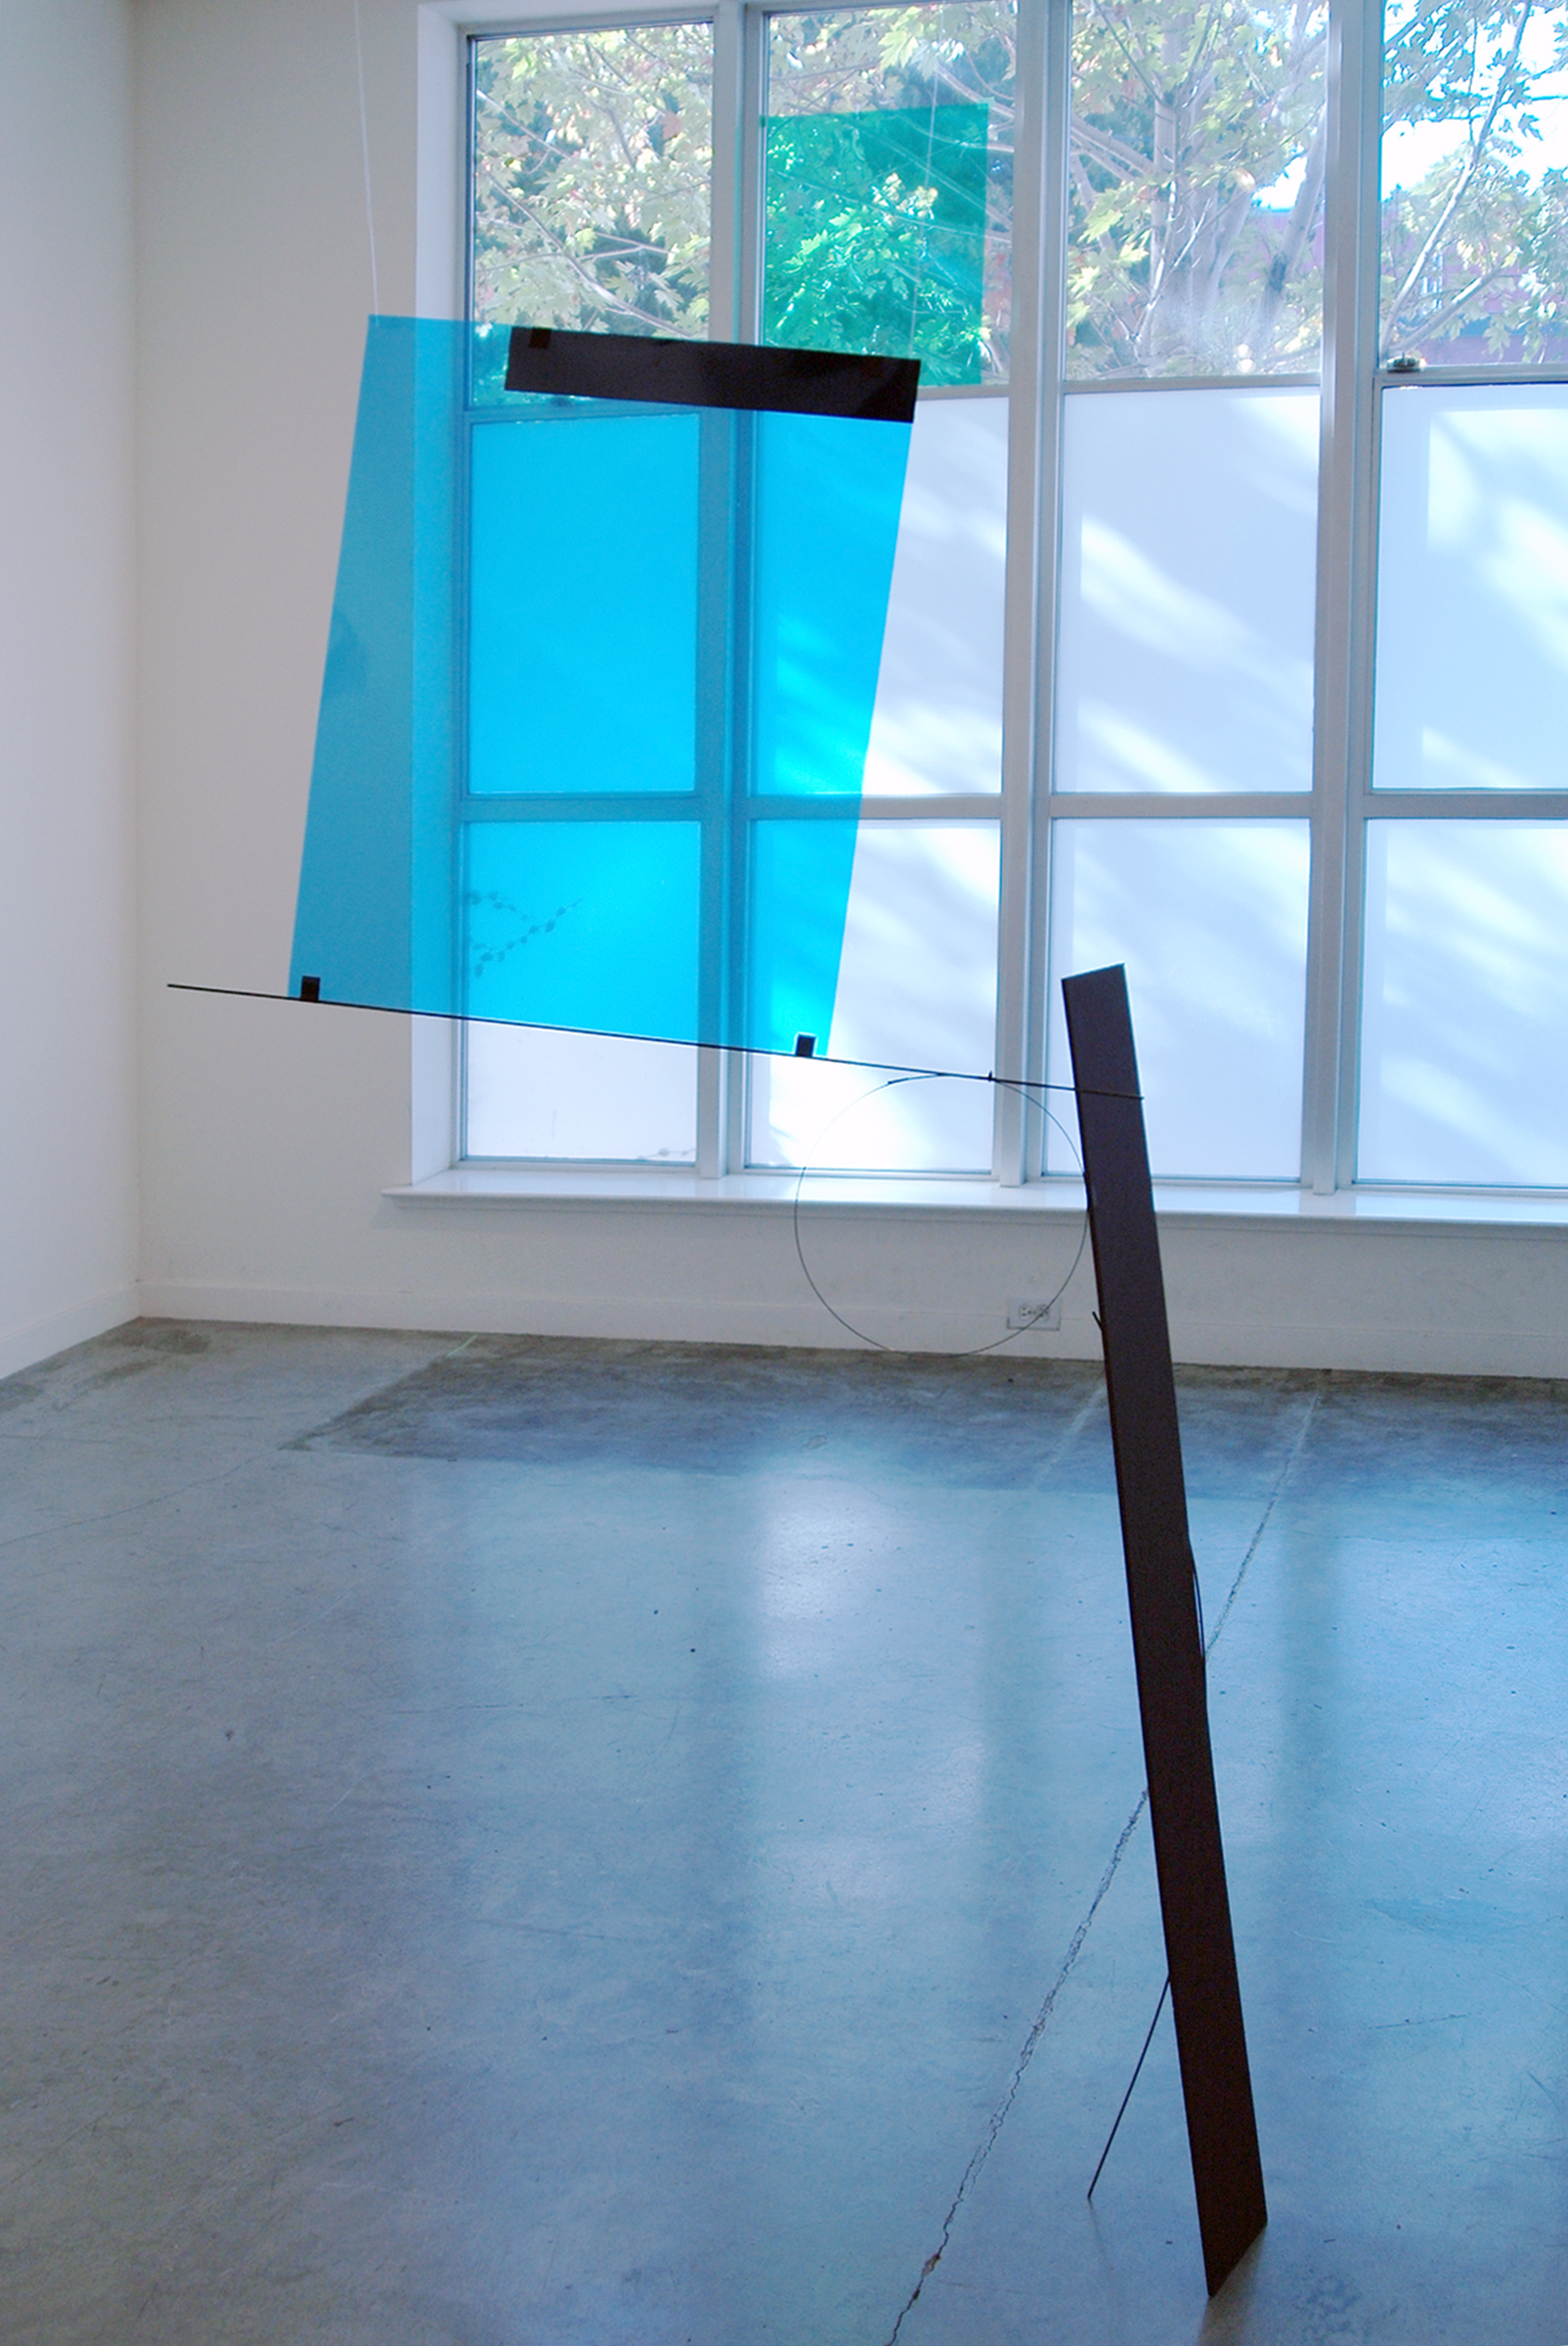   ALICE CATTANEO   Untitled , 2013, blue and green acetate, foam board, tape iron, cable ties, 72" x 41" x 9 